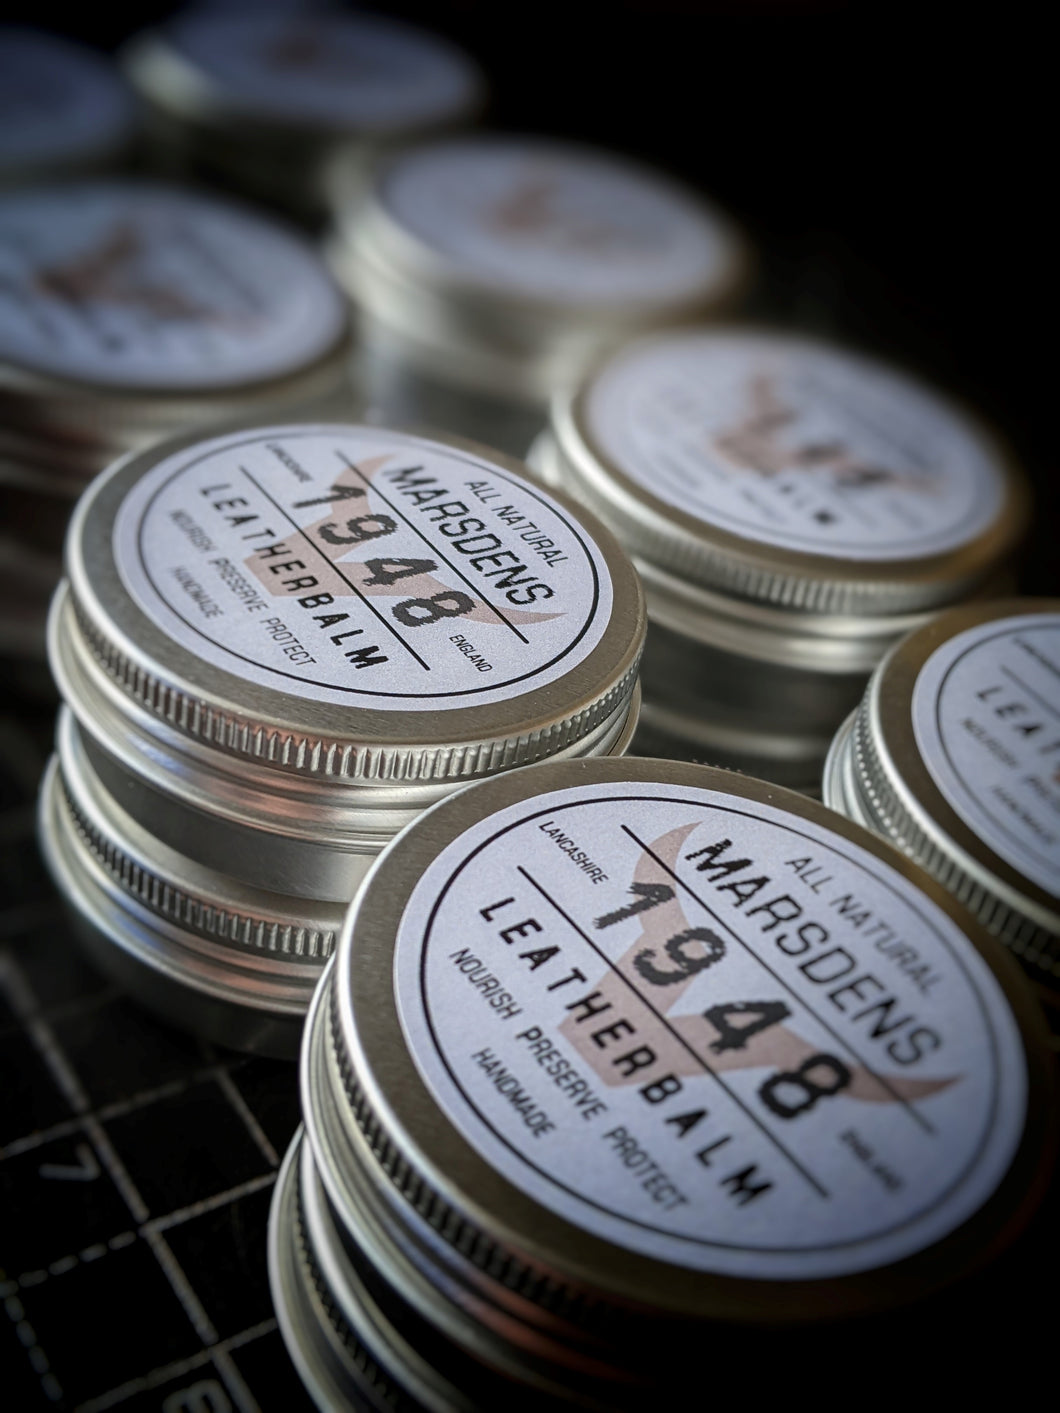 Small batch artisan leather balm that is perfect for nourishing vegetable tanned leather to keep it soft and supple. 100% handmade from 100% natural products so this balm is kind to your luxury leather goods. www.leathercompositions.com